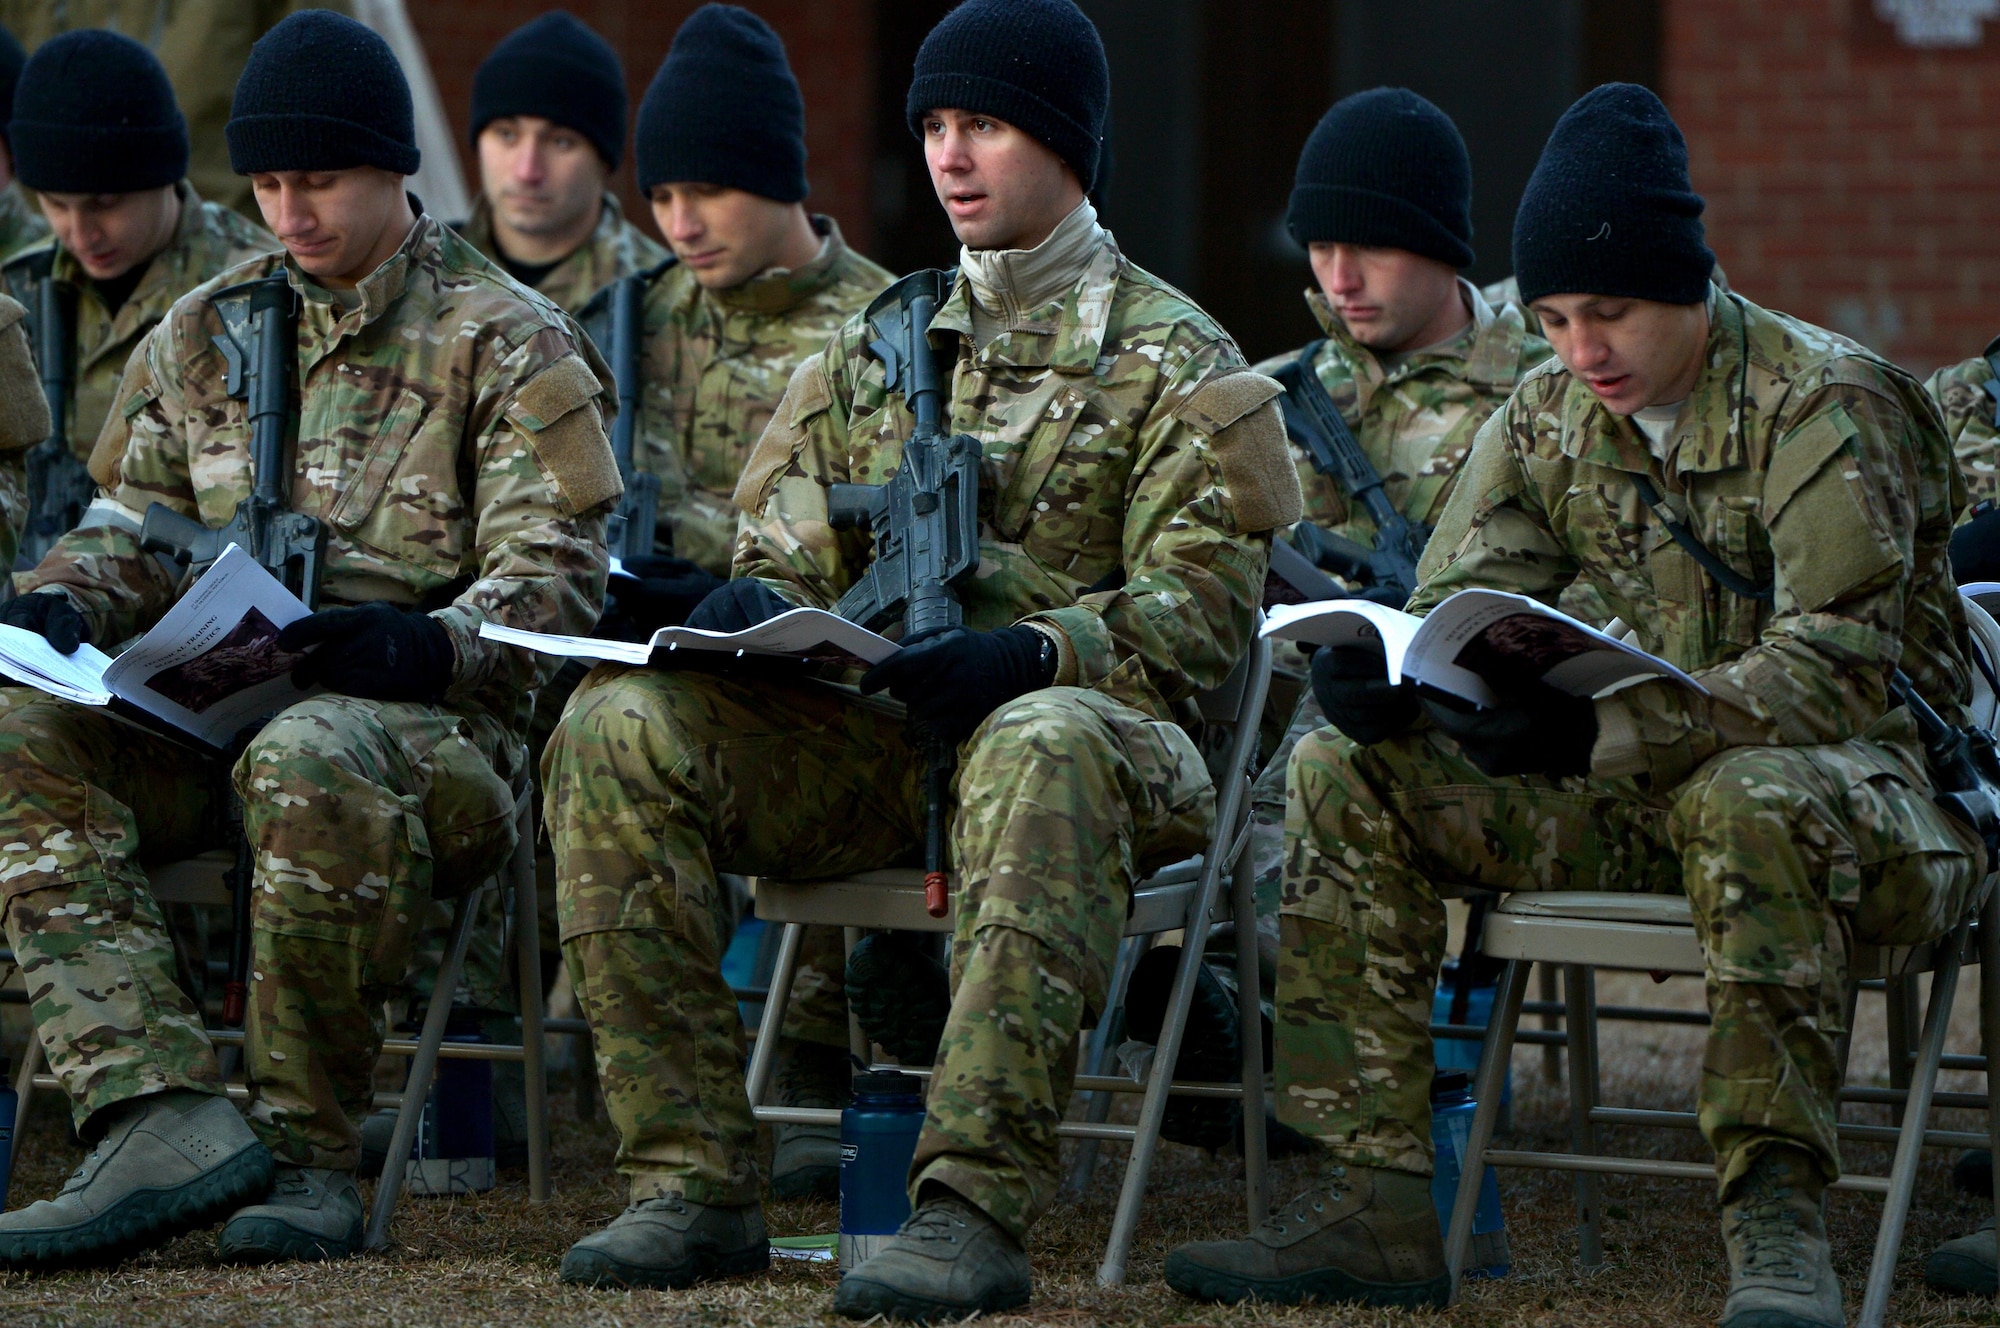 U.S. Air Force Combat Control trainees assigned to Operating Location C, 342nd Training Squadron, ask questions while receiving academic instruction prior to participating in fast-rope training on a cold winter morning, Feb. 13, 2015 at Pope Army Airfield, North Carolina. Academic instruction is a large part of fast-rope training for CCT students who are trying to learn and hone the skillset. (U.S. Air Force photo by Staff Sgt. Kenny Holston)   